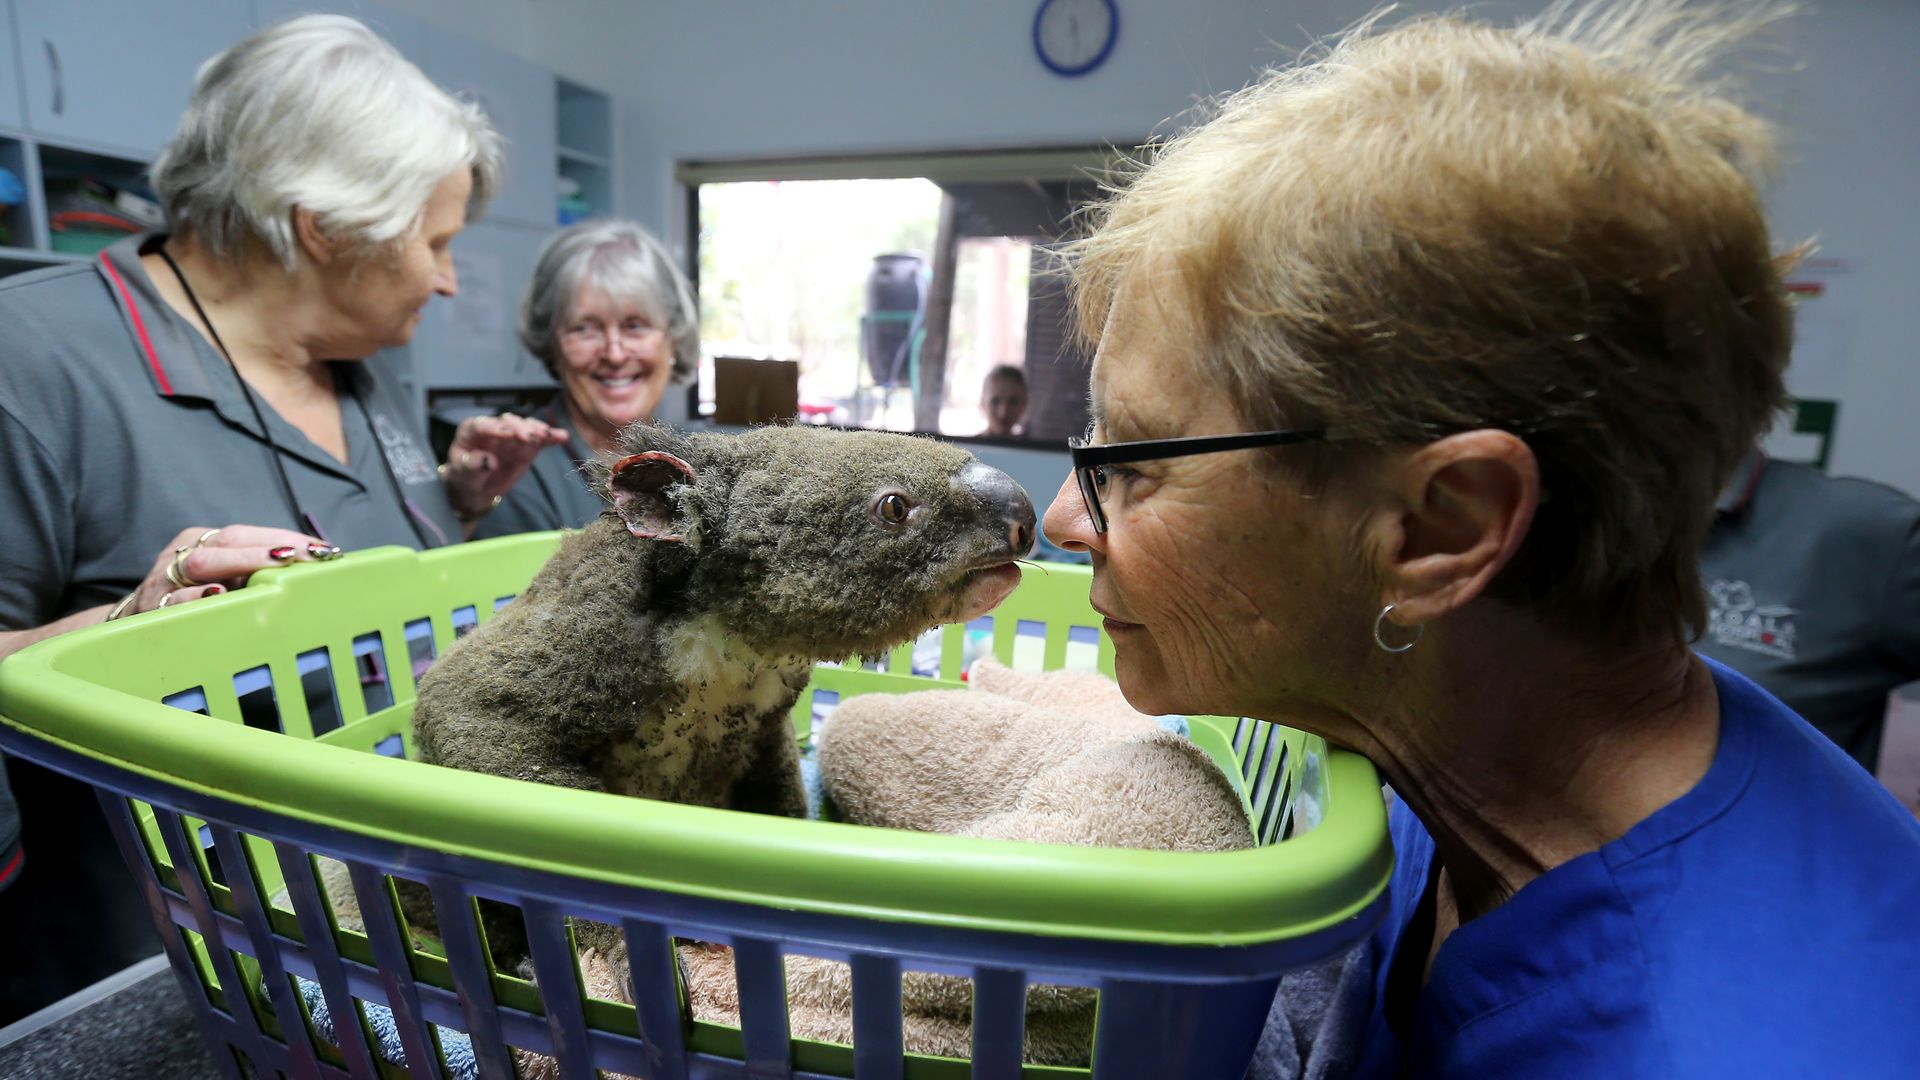 Sheila Bailey, Judy Brady and Clinical Director Cheyne Flanagan tend to a koala named Paul from Lake Innes Nature Reserve as he recovers from burns at The Port Macquarie Koala Hospital 